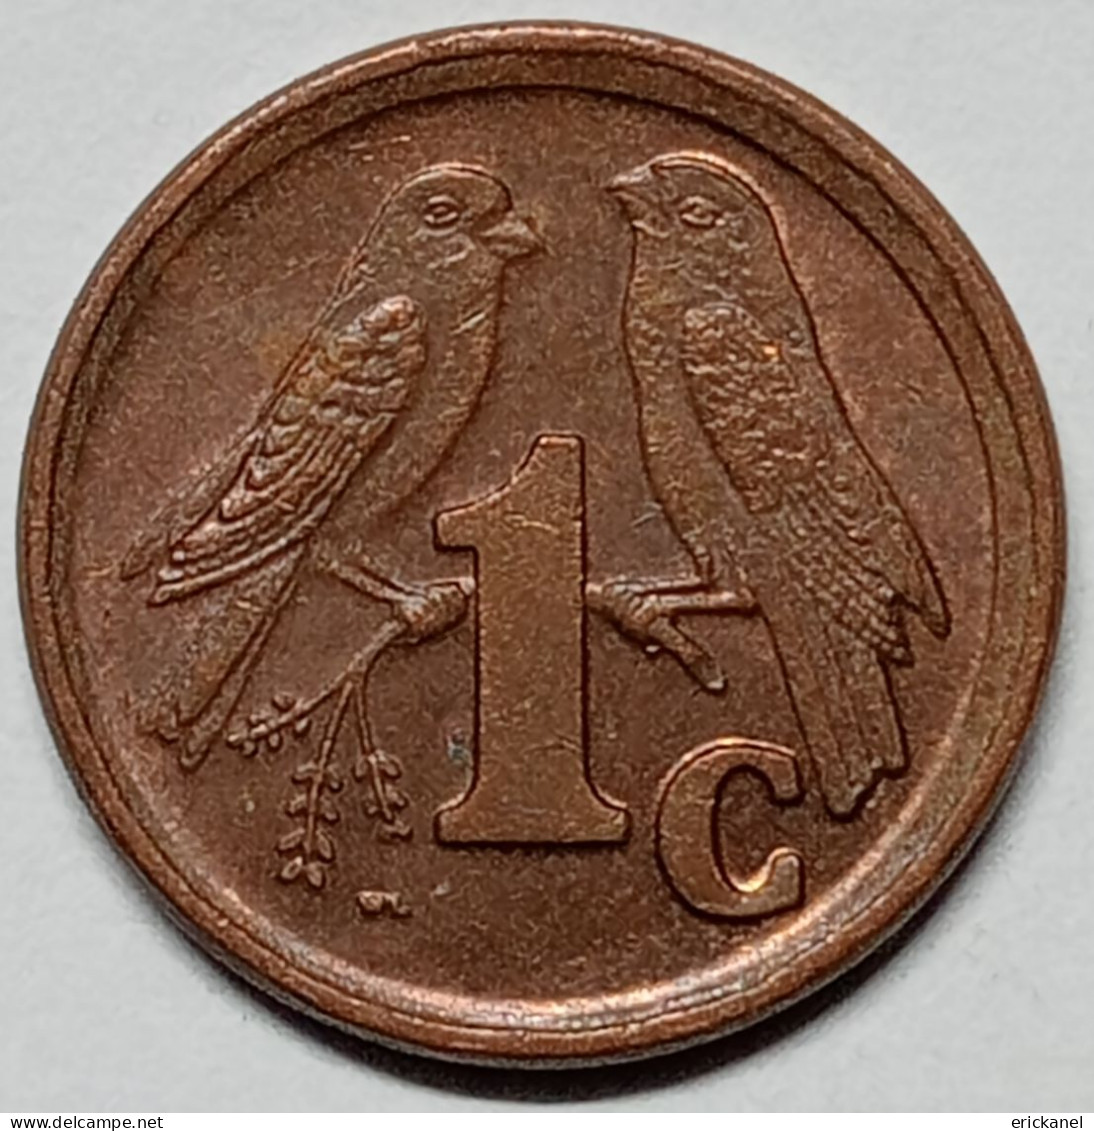 SOUTH AFRICA 1990 1 CENT - South Africa